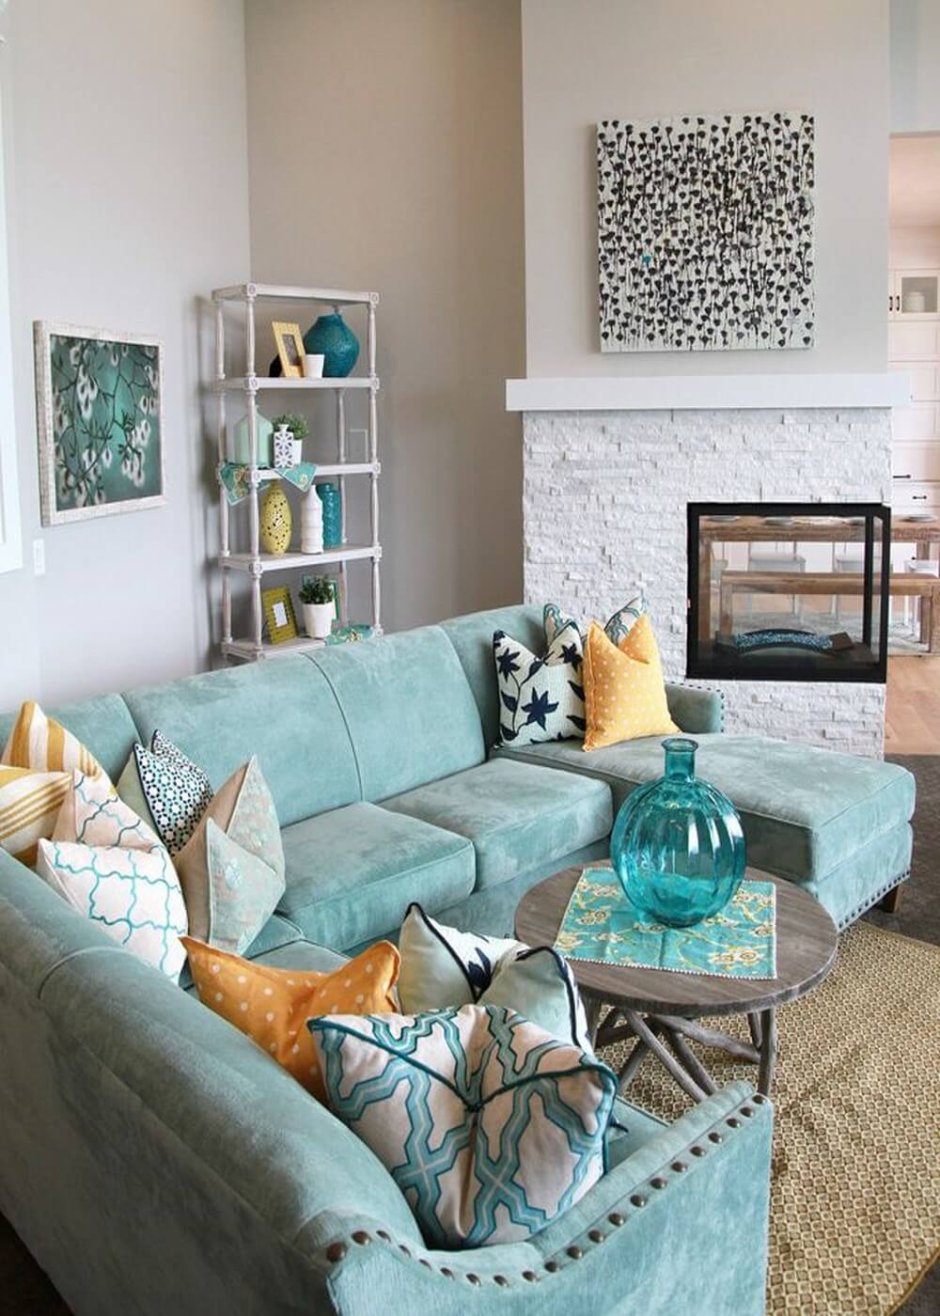 Turquoise and brown living room decor